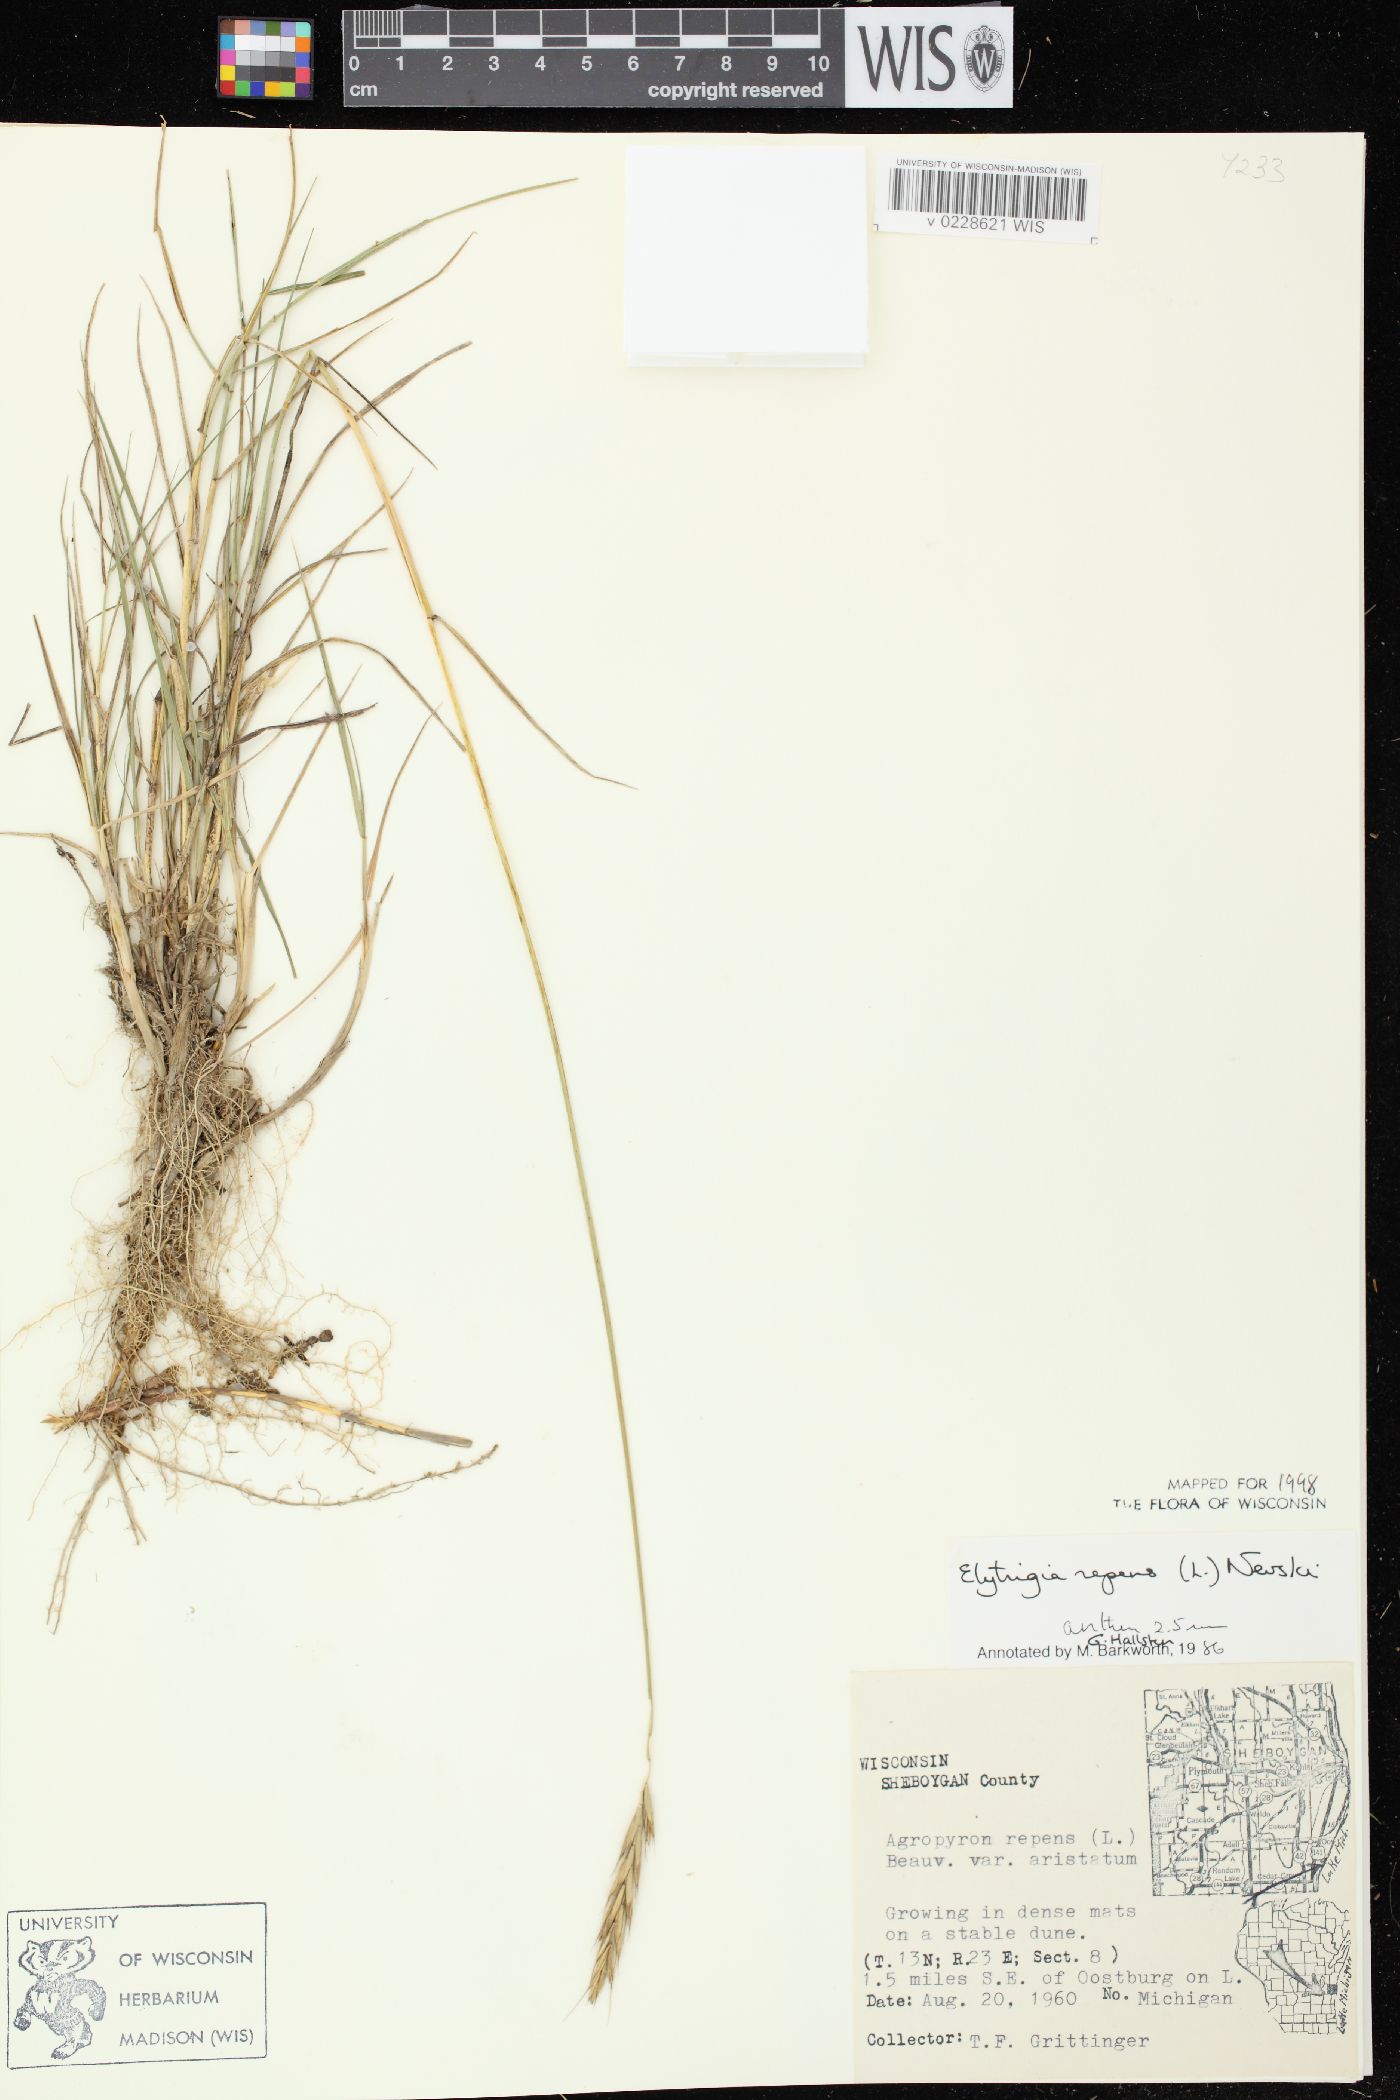 Elymus repens image